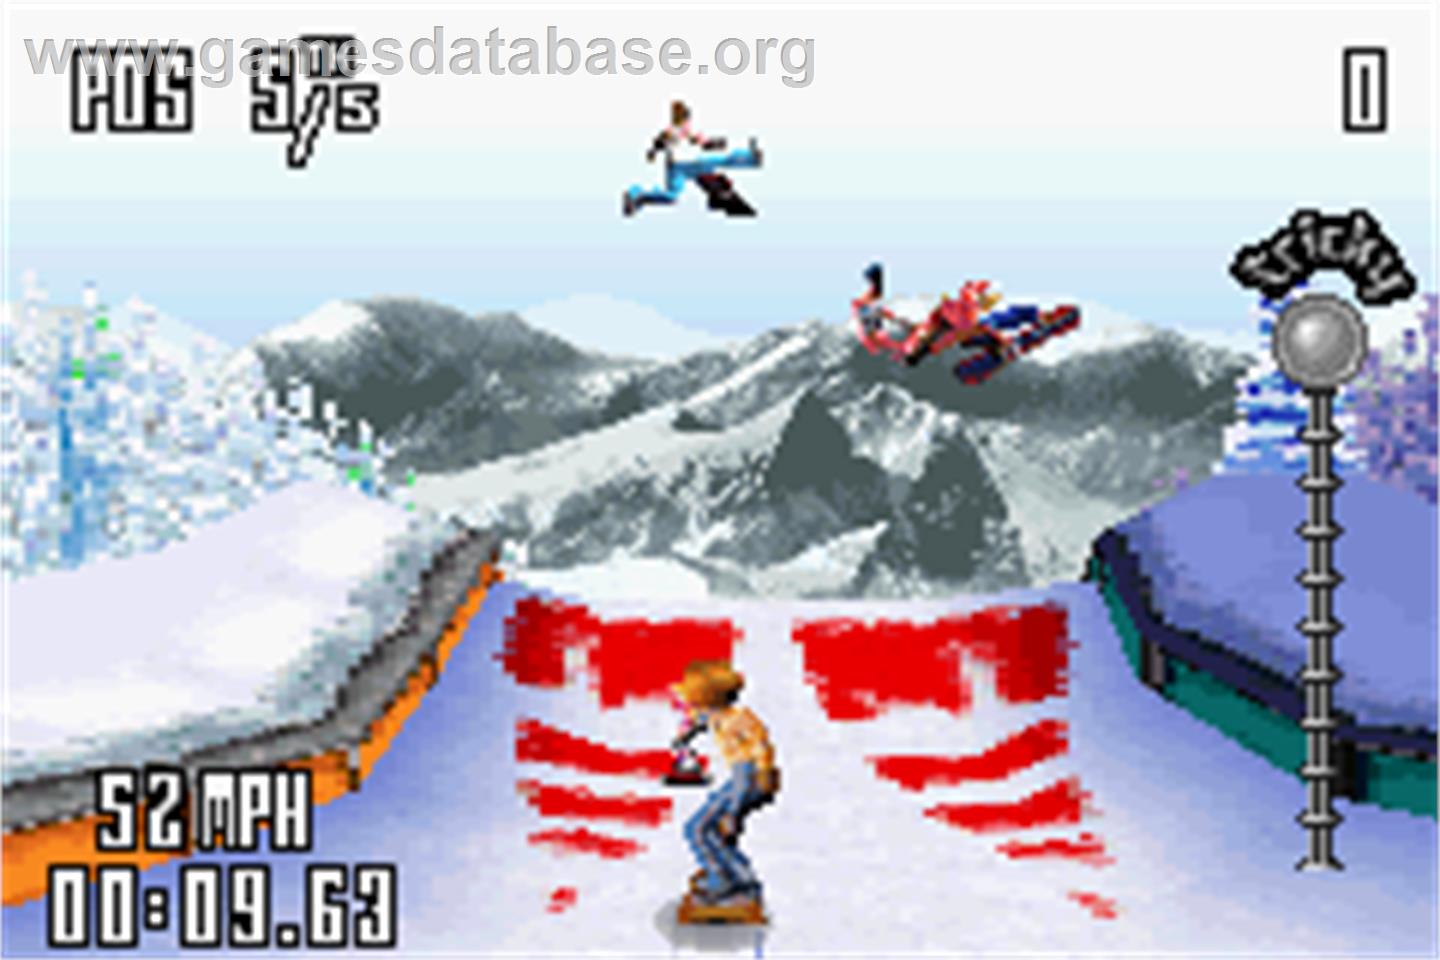 SSX Tricky - Nintendo Game Boy Advance - Artwork - In Game